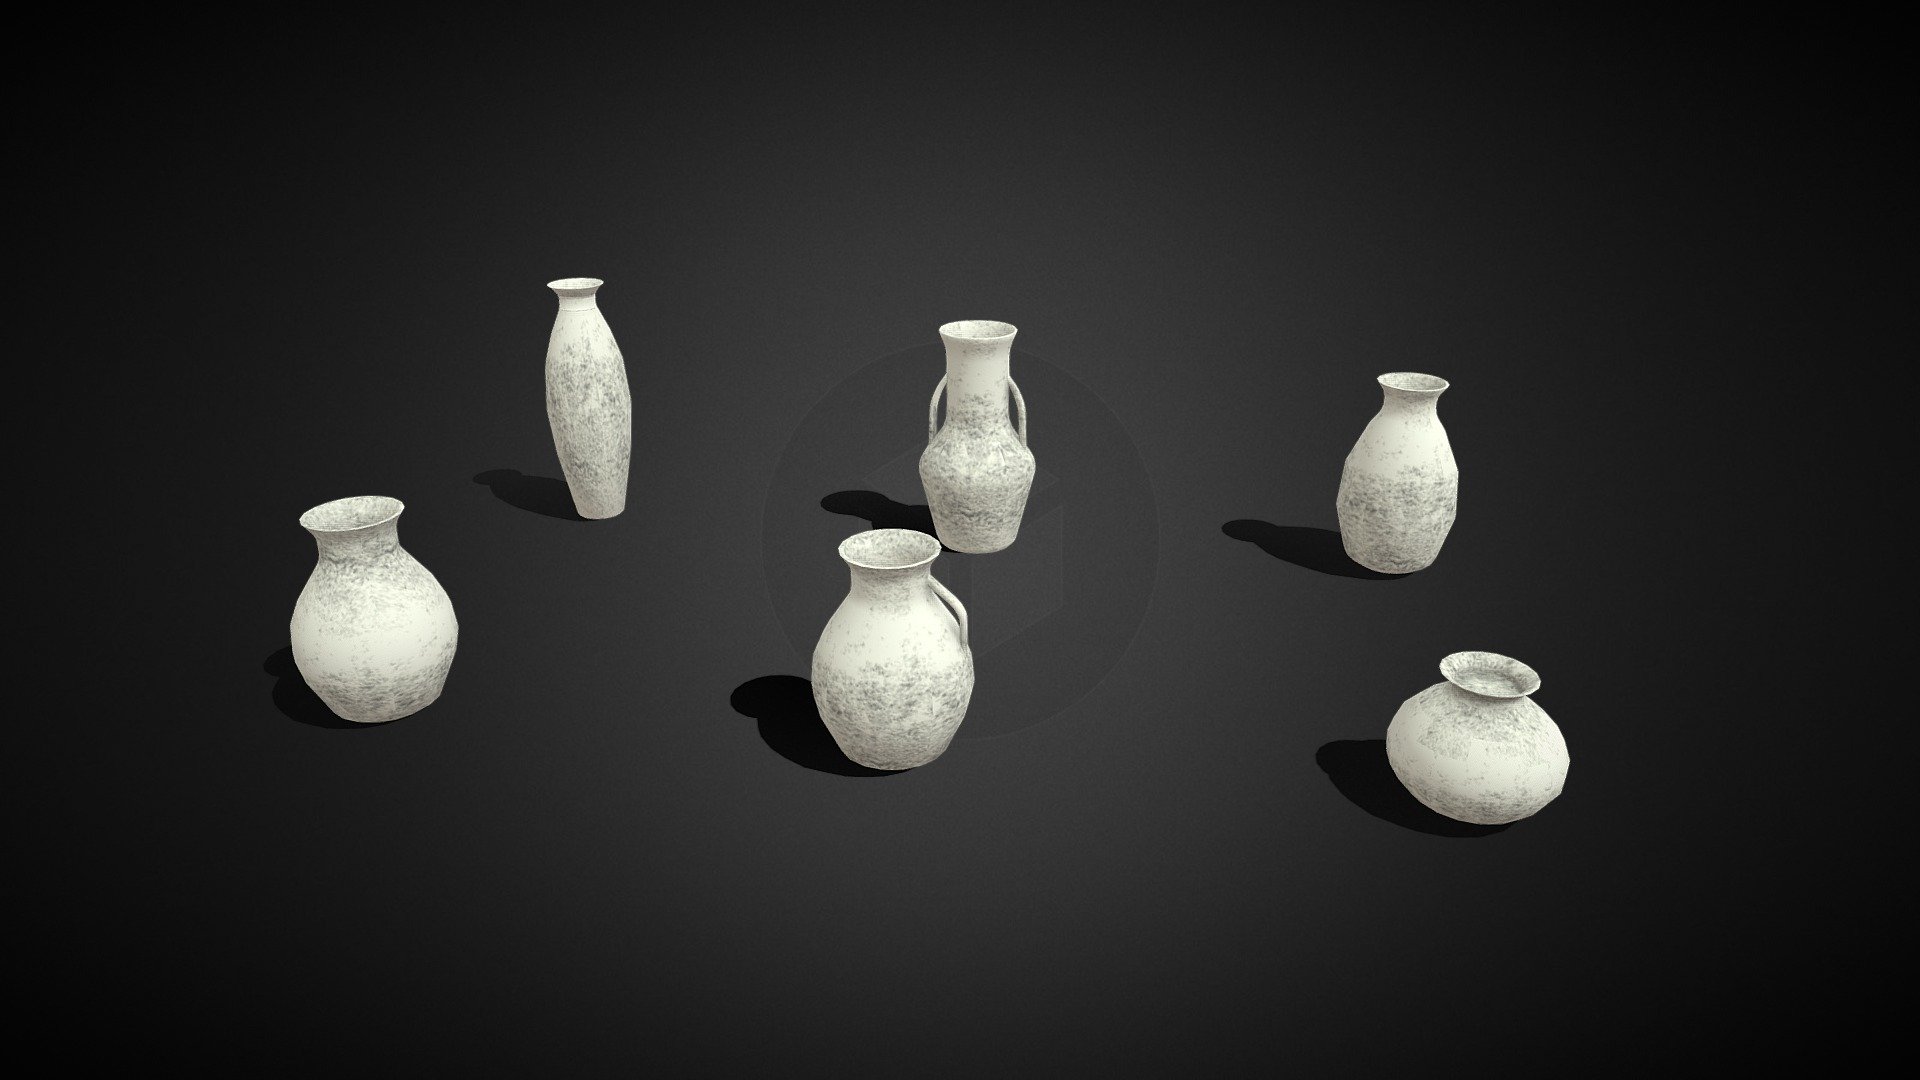 A collection of white urns inspired by old roman pottery.
Formats: FBX             
Modeled &amp; Texured by: MOJackal
Collection link: https://skfb.ly/6ZstE
 - Urns - Buy Royalty Free 3D model by MOJackal 3d model